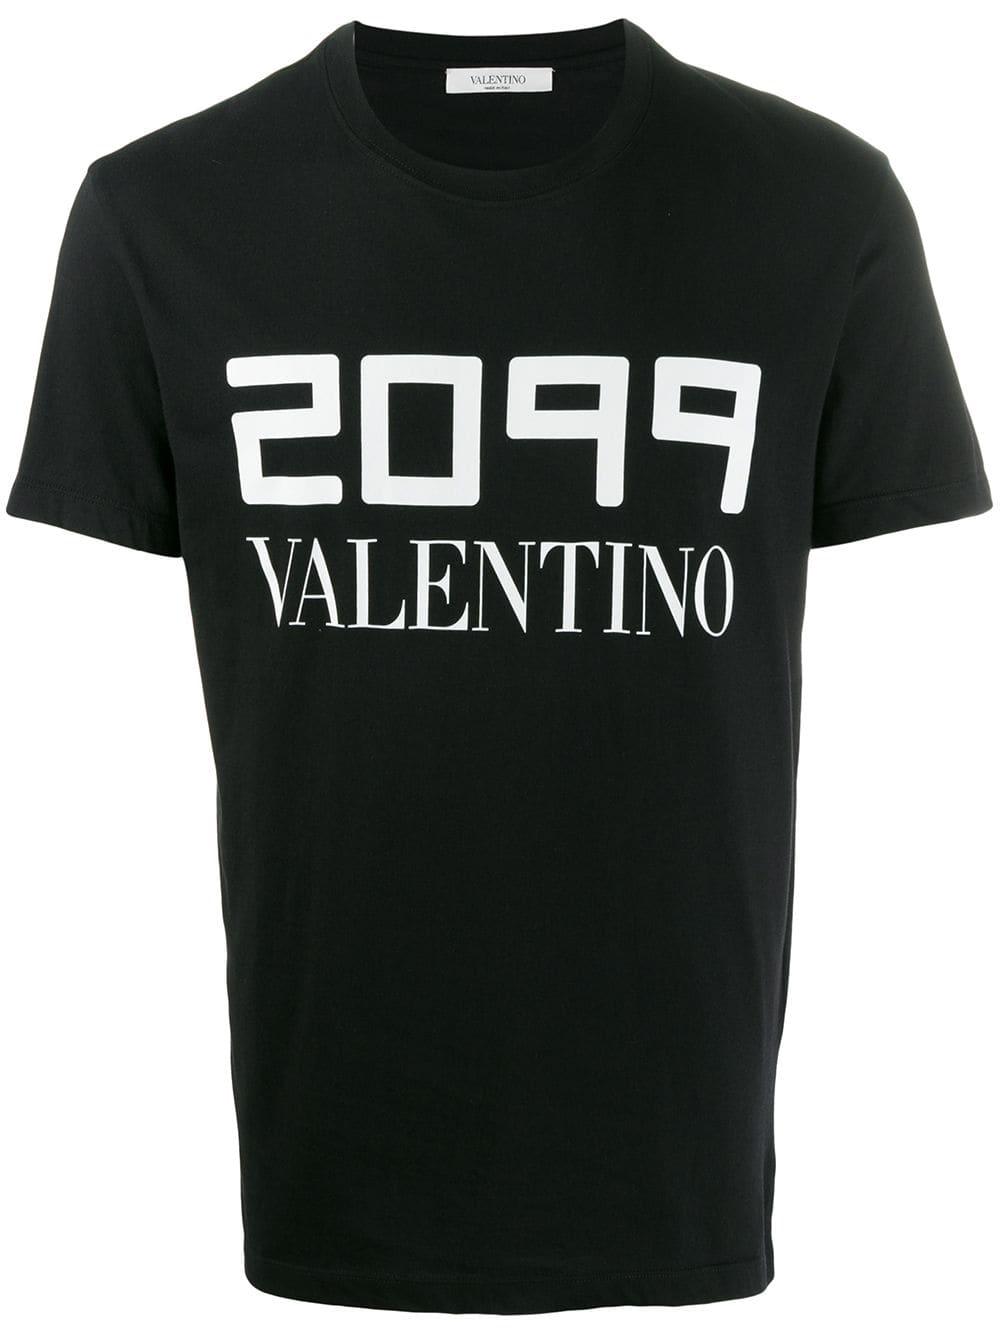 Valentino Cotton 2099 T-shirt in Black for Men - Save 75% - Lyst